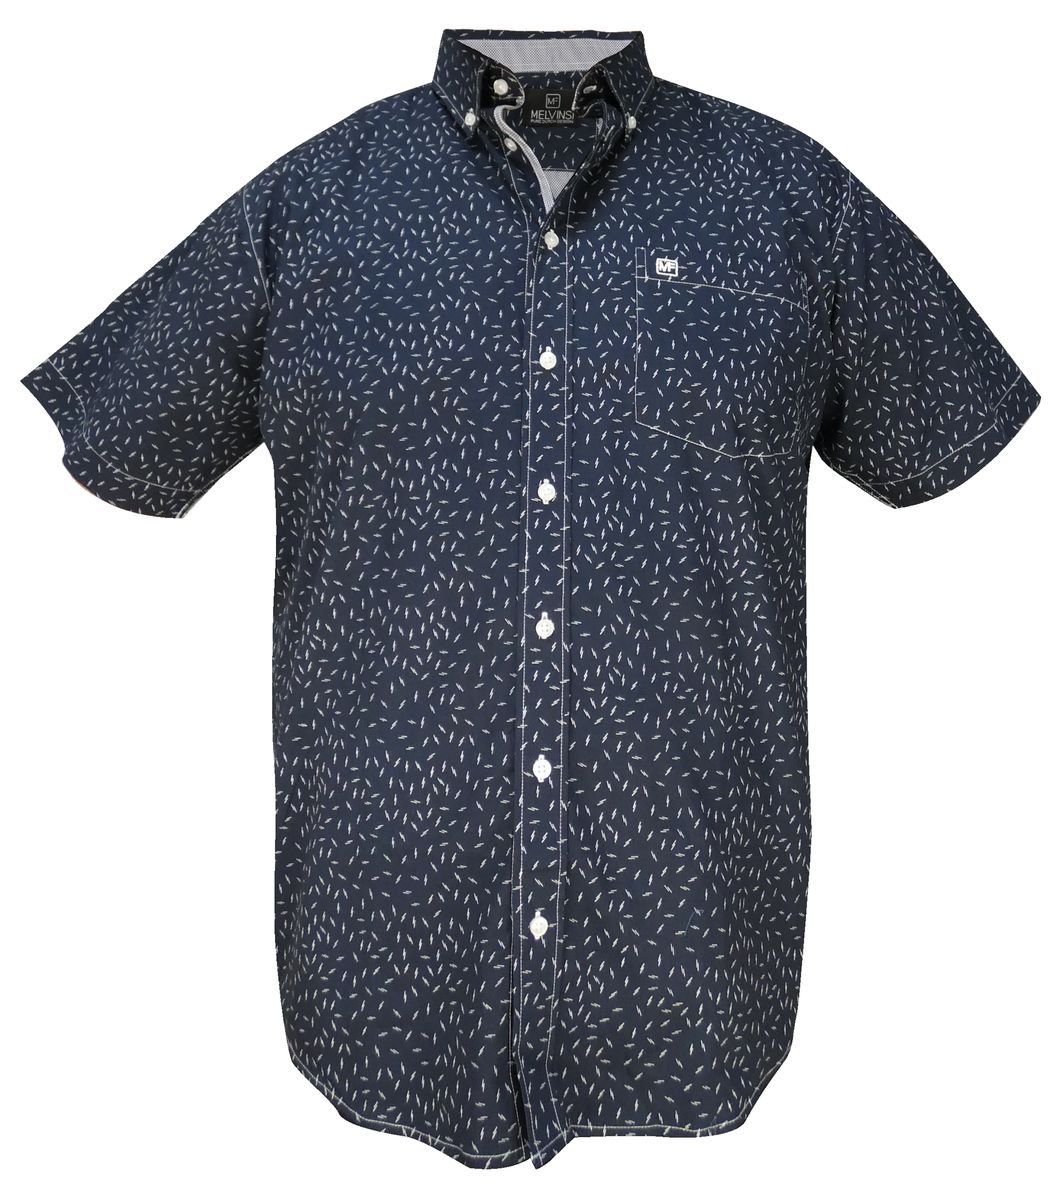 Short Sleeve Shirt With Print Of The Brand Melvinsi - 992103 | Shop ...